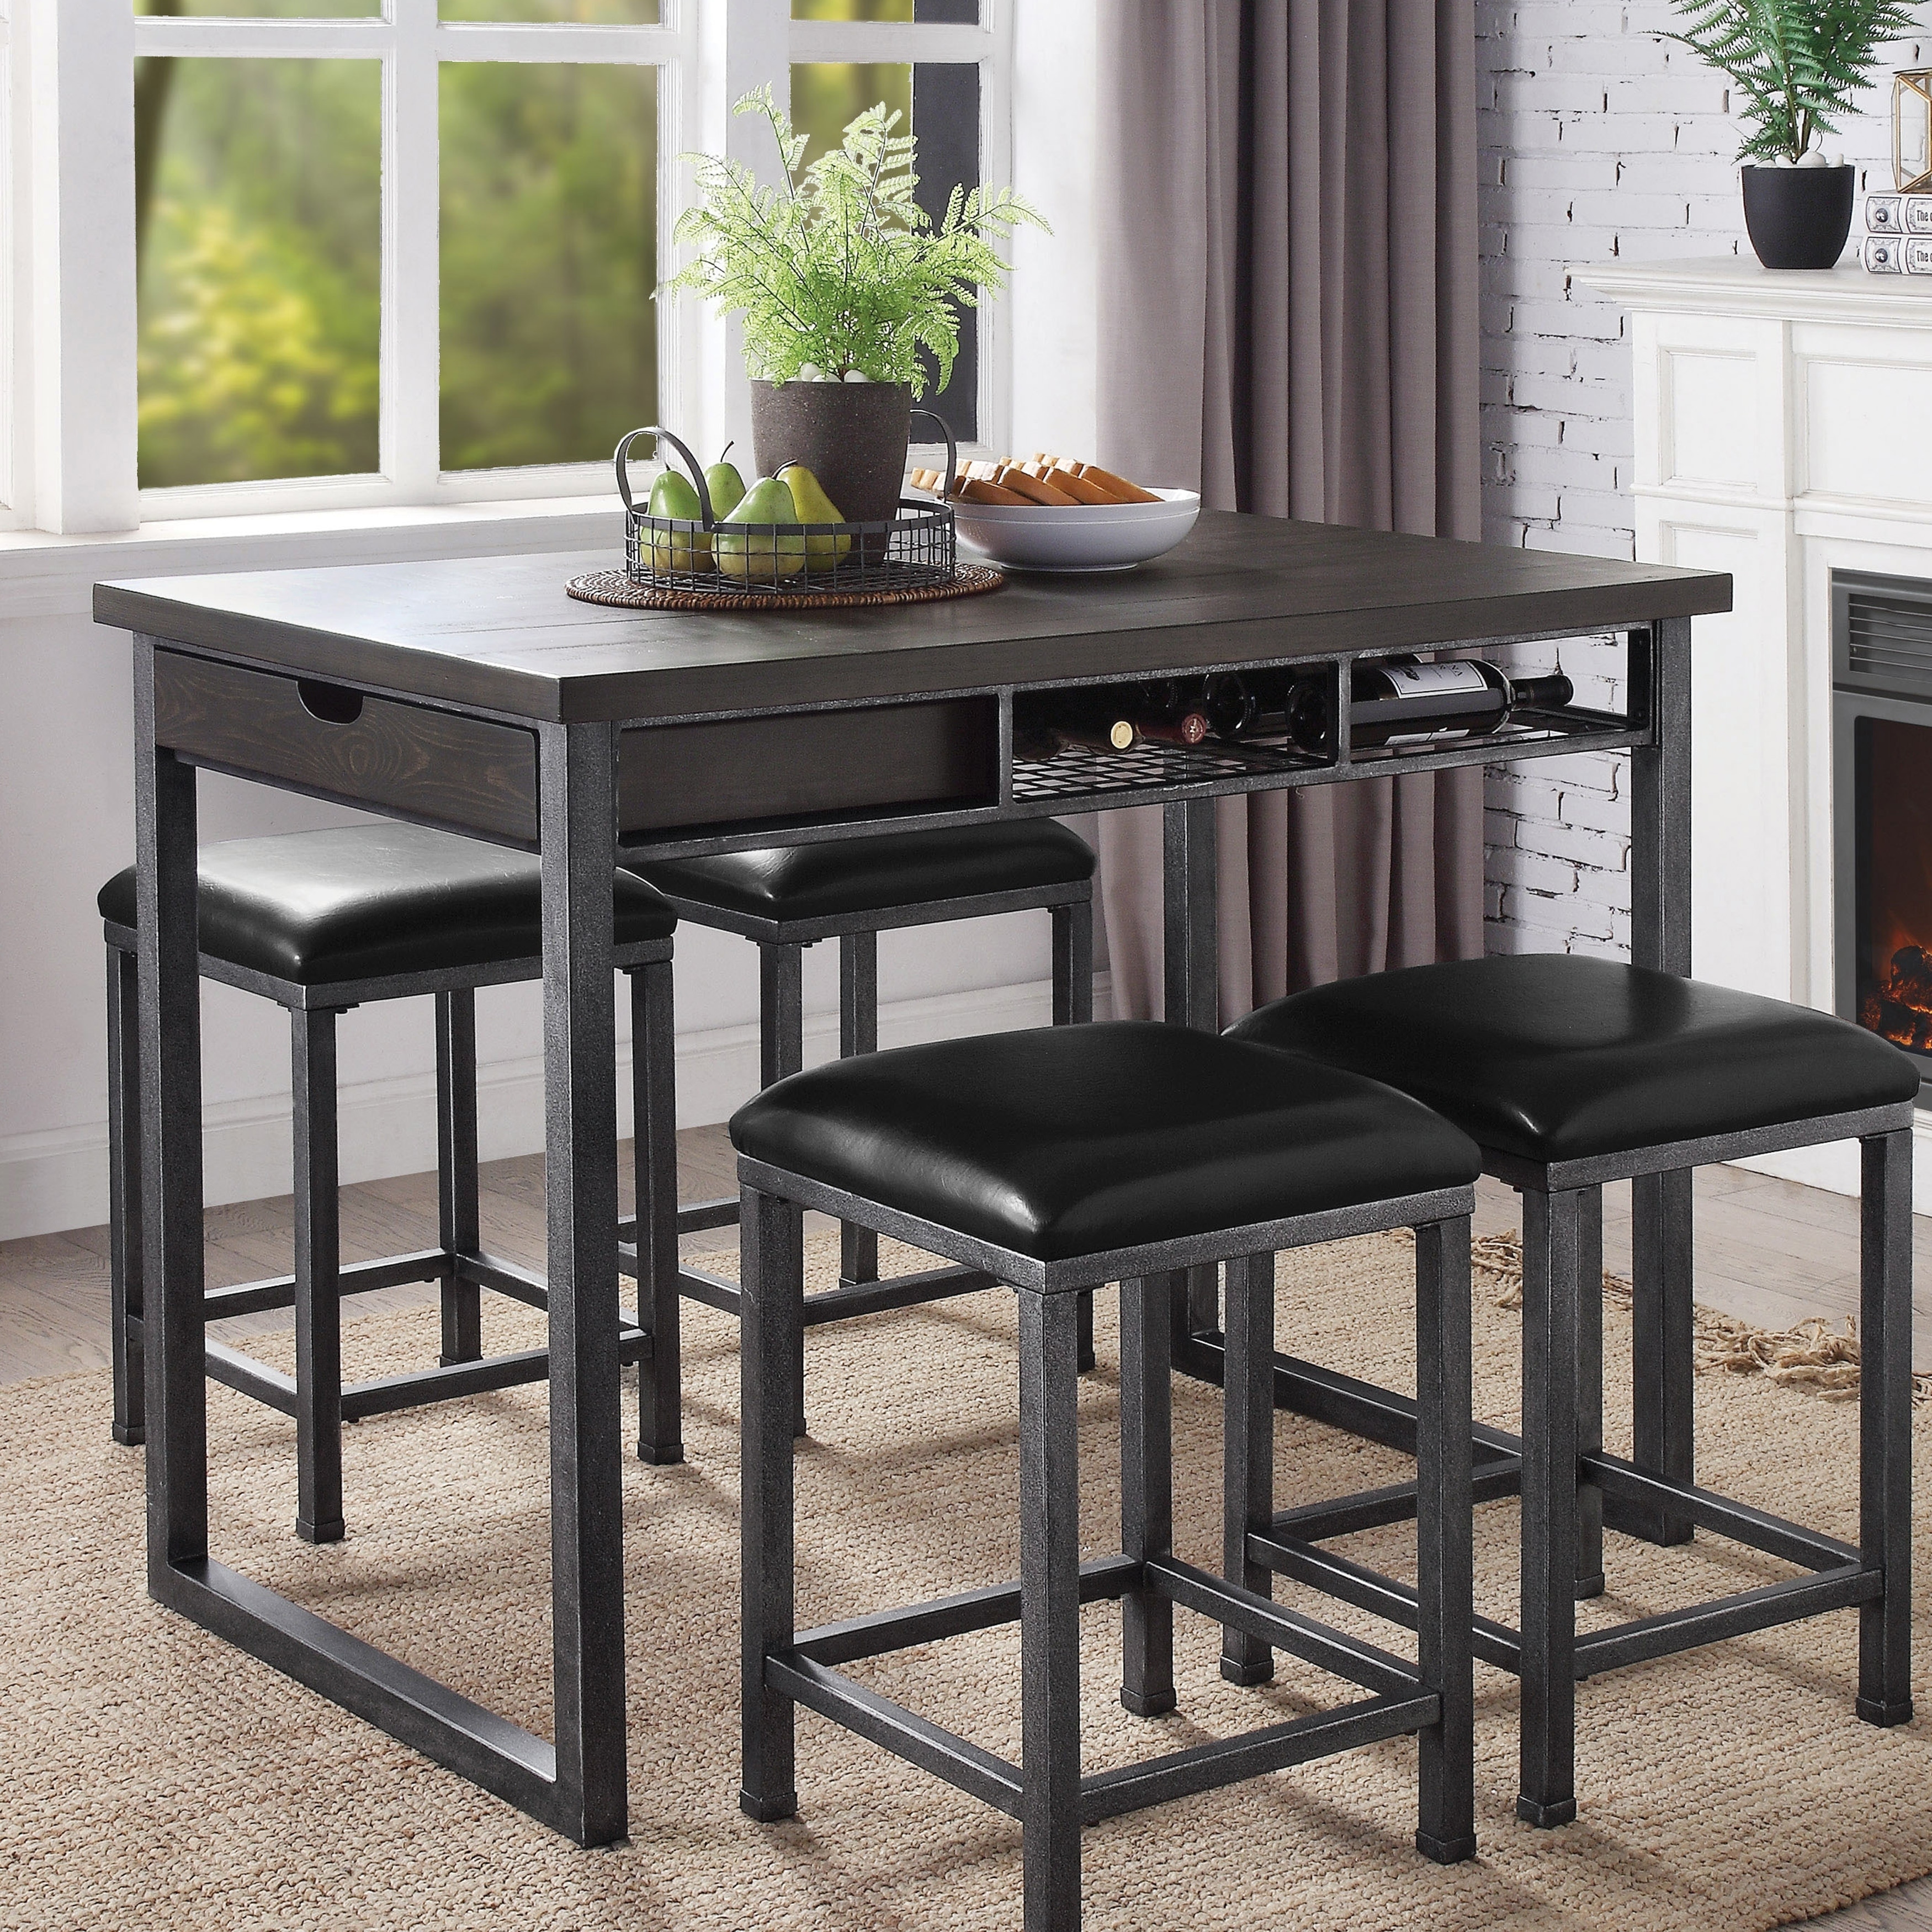 Carbon Loft Mezzo Counter Height Dining Table With Storage On Sale Overstock 23570128